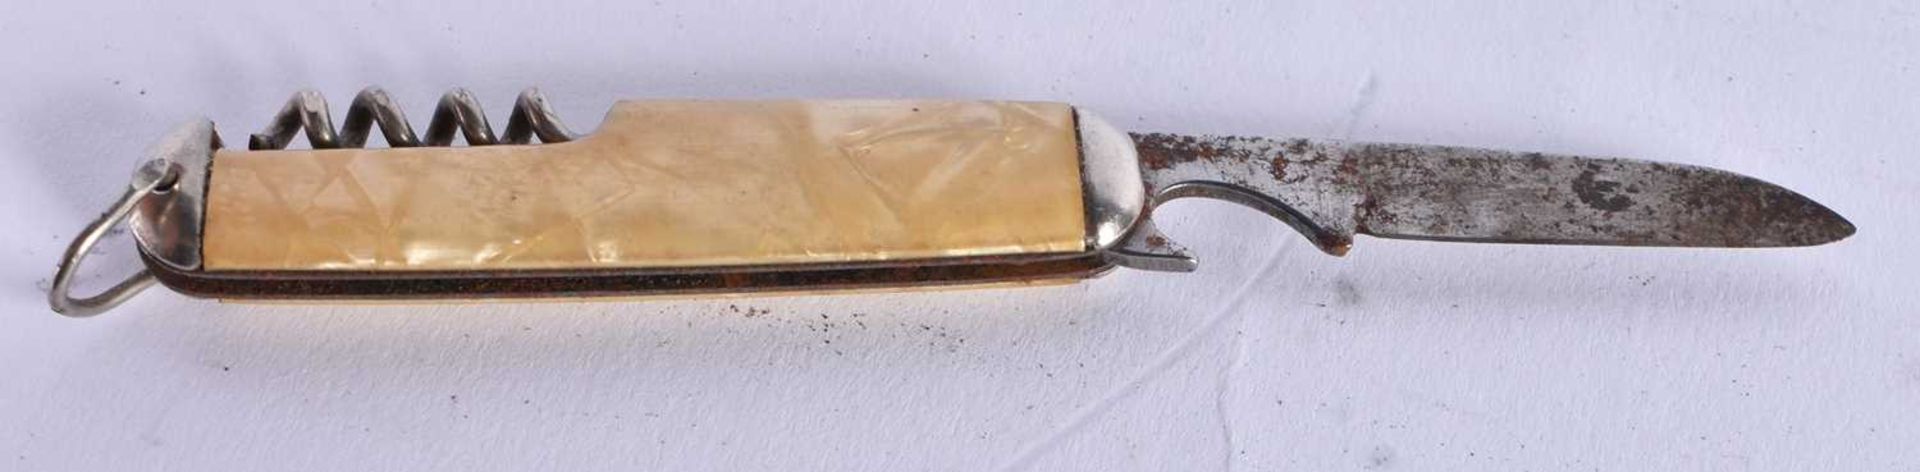 AN ANTIQUE HARRY LE MOINE COMBINATION KNIFE and a ST Dupont silver plated lighter. Largest 14 cm - Image 6 of 6